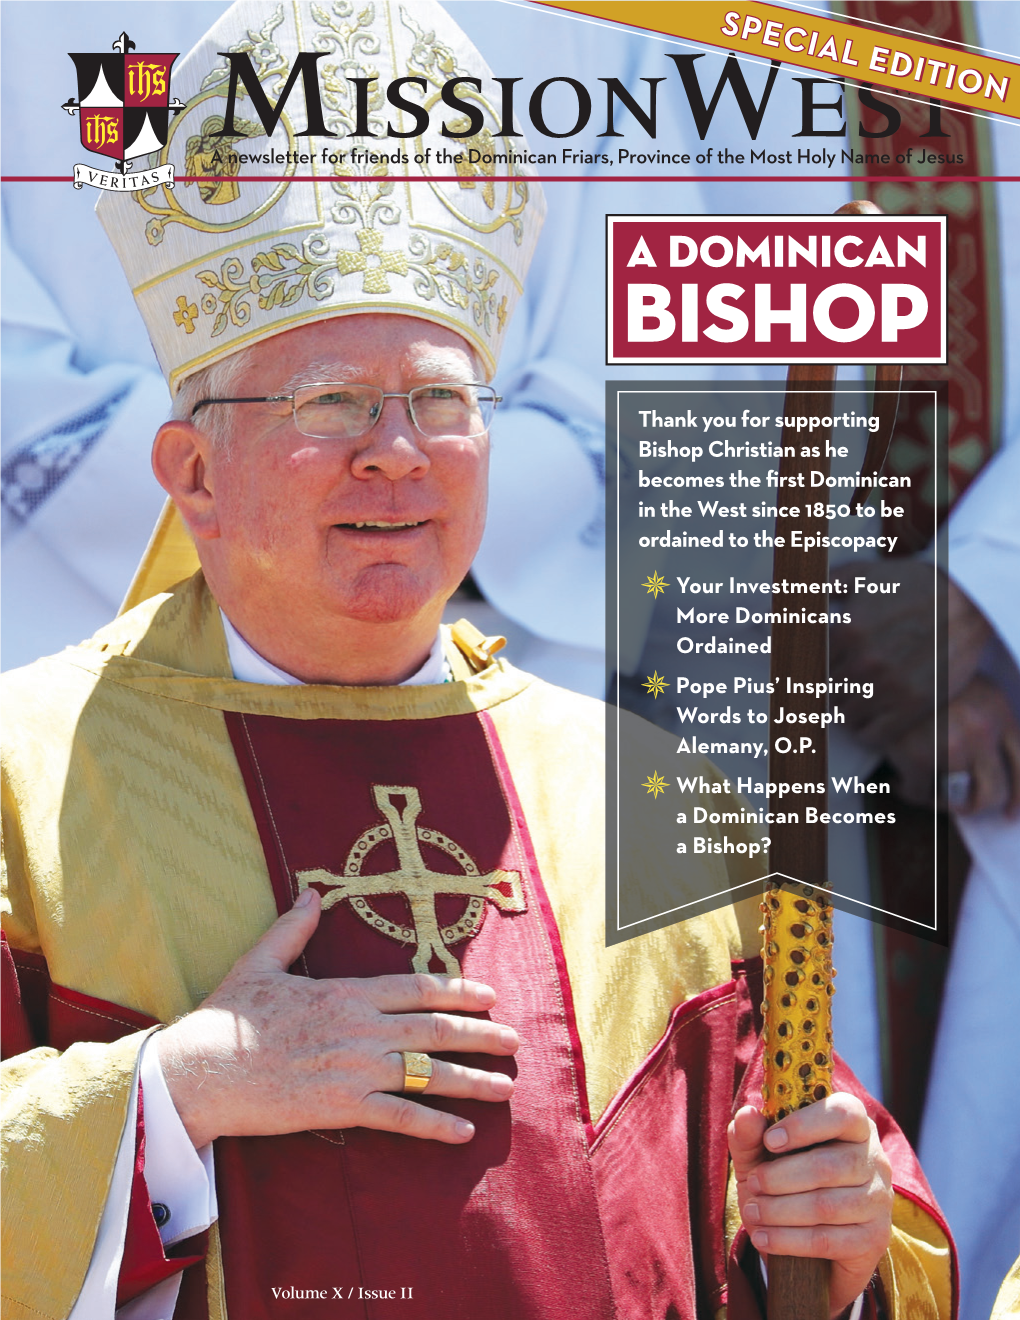 Missionwest a Newsletter for Friends of the Dominican Friars, Province of the Most Holy Name of Jesus